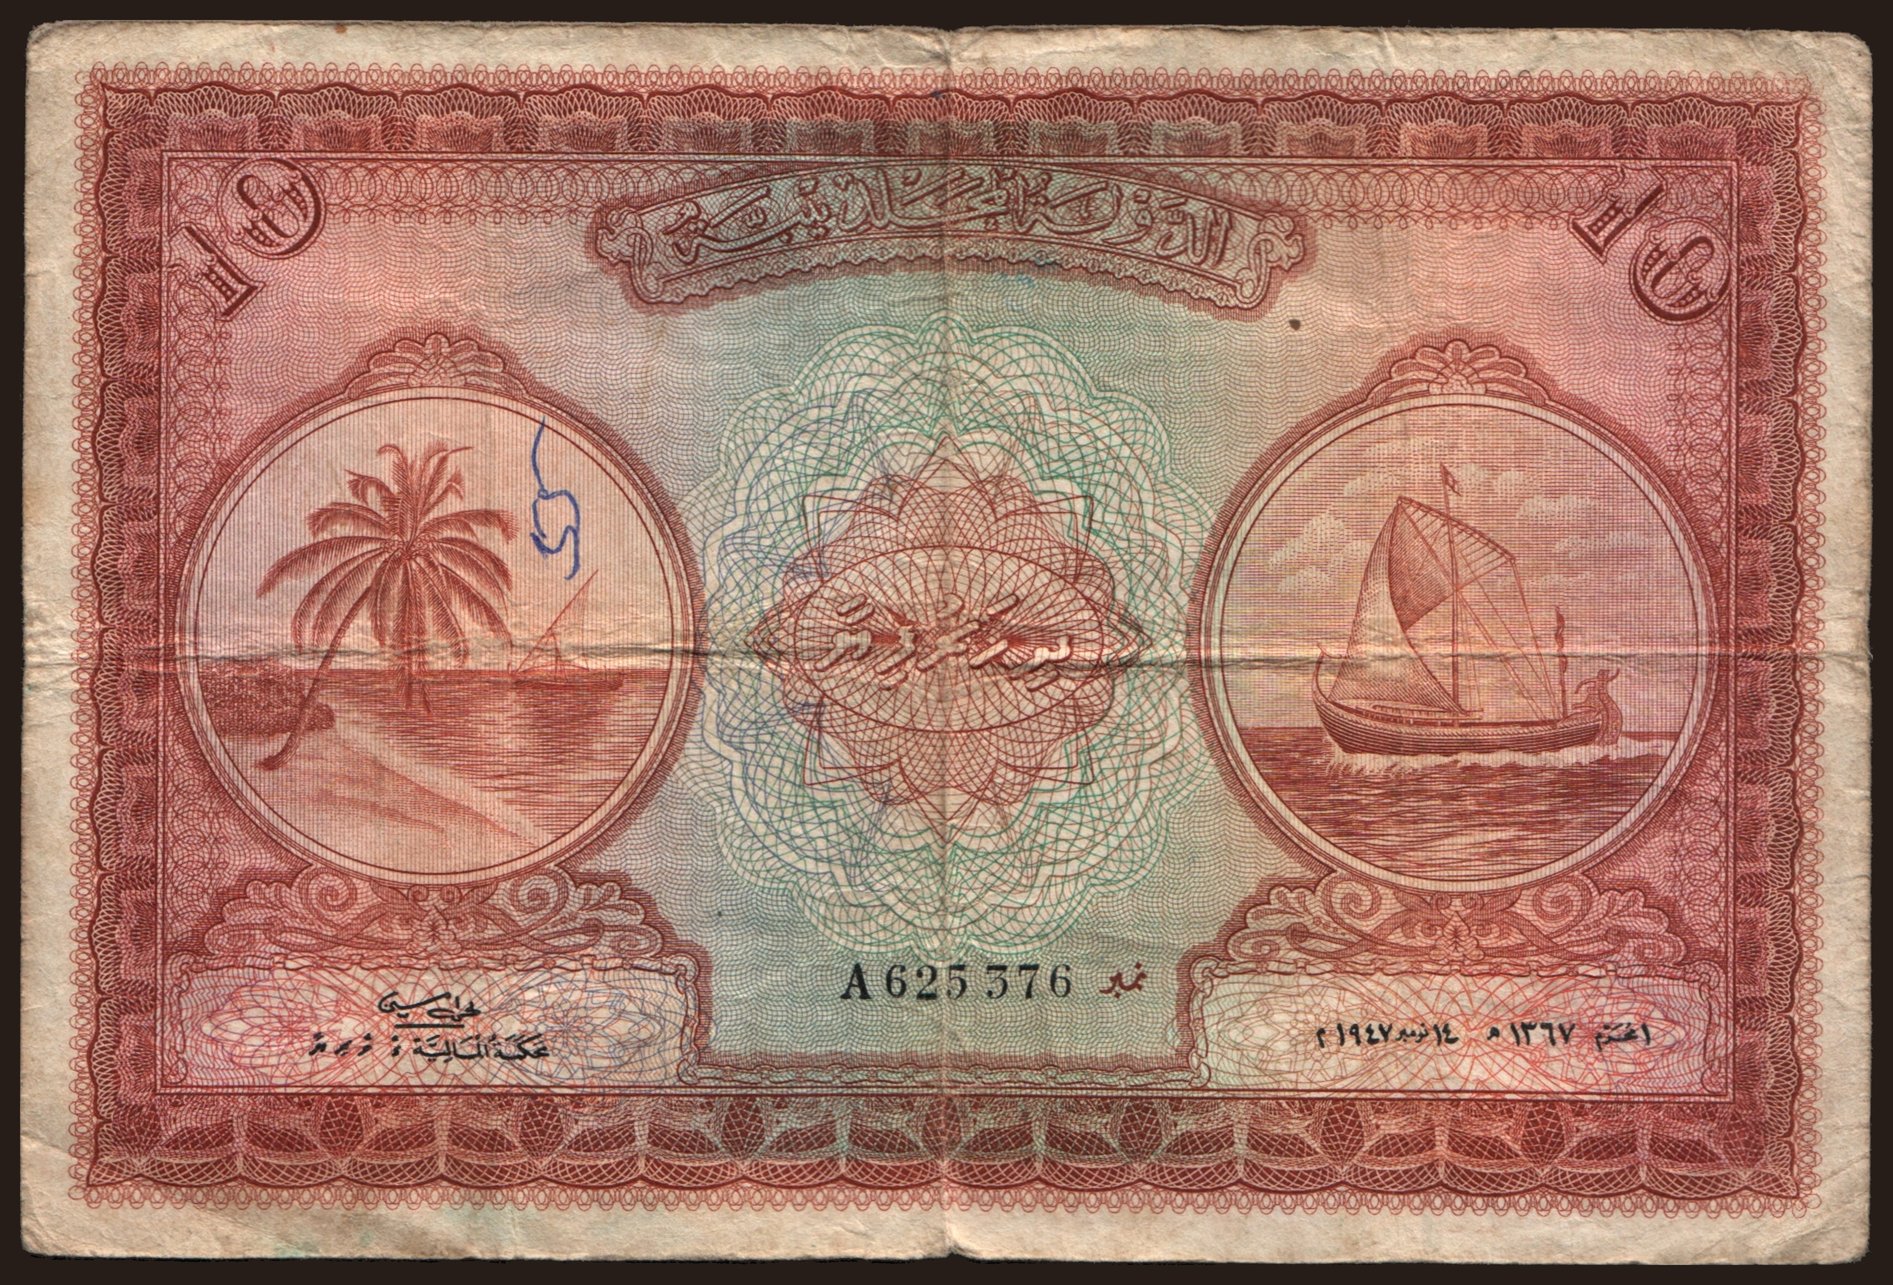 10 rupees, 1947